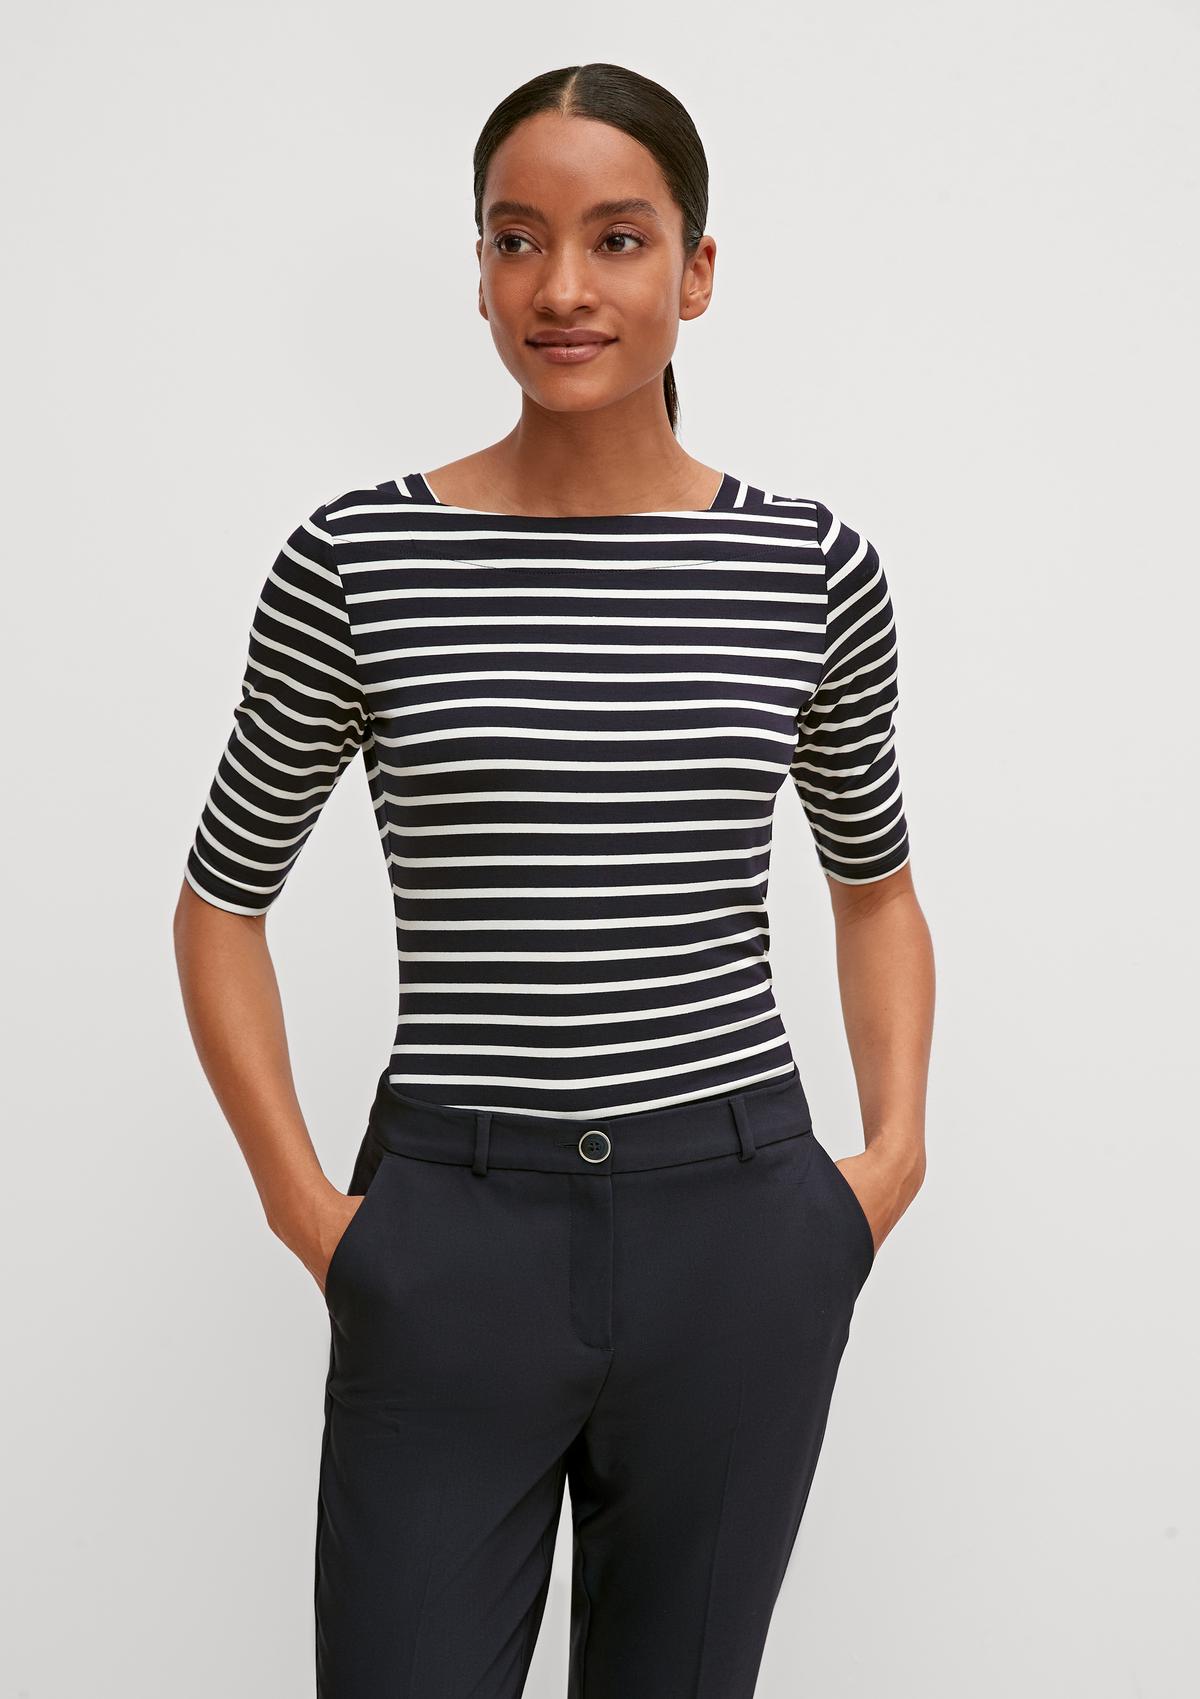 Striped top with mid-length sleeves